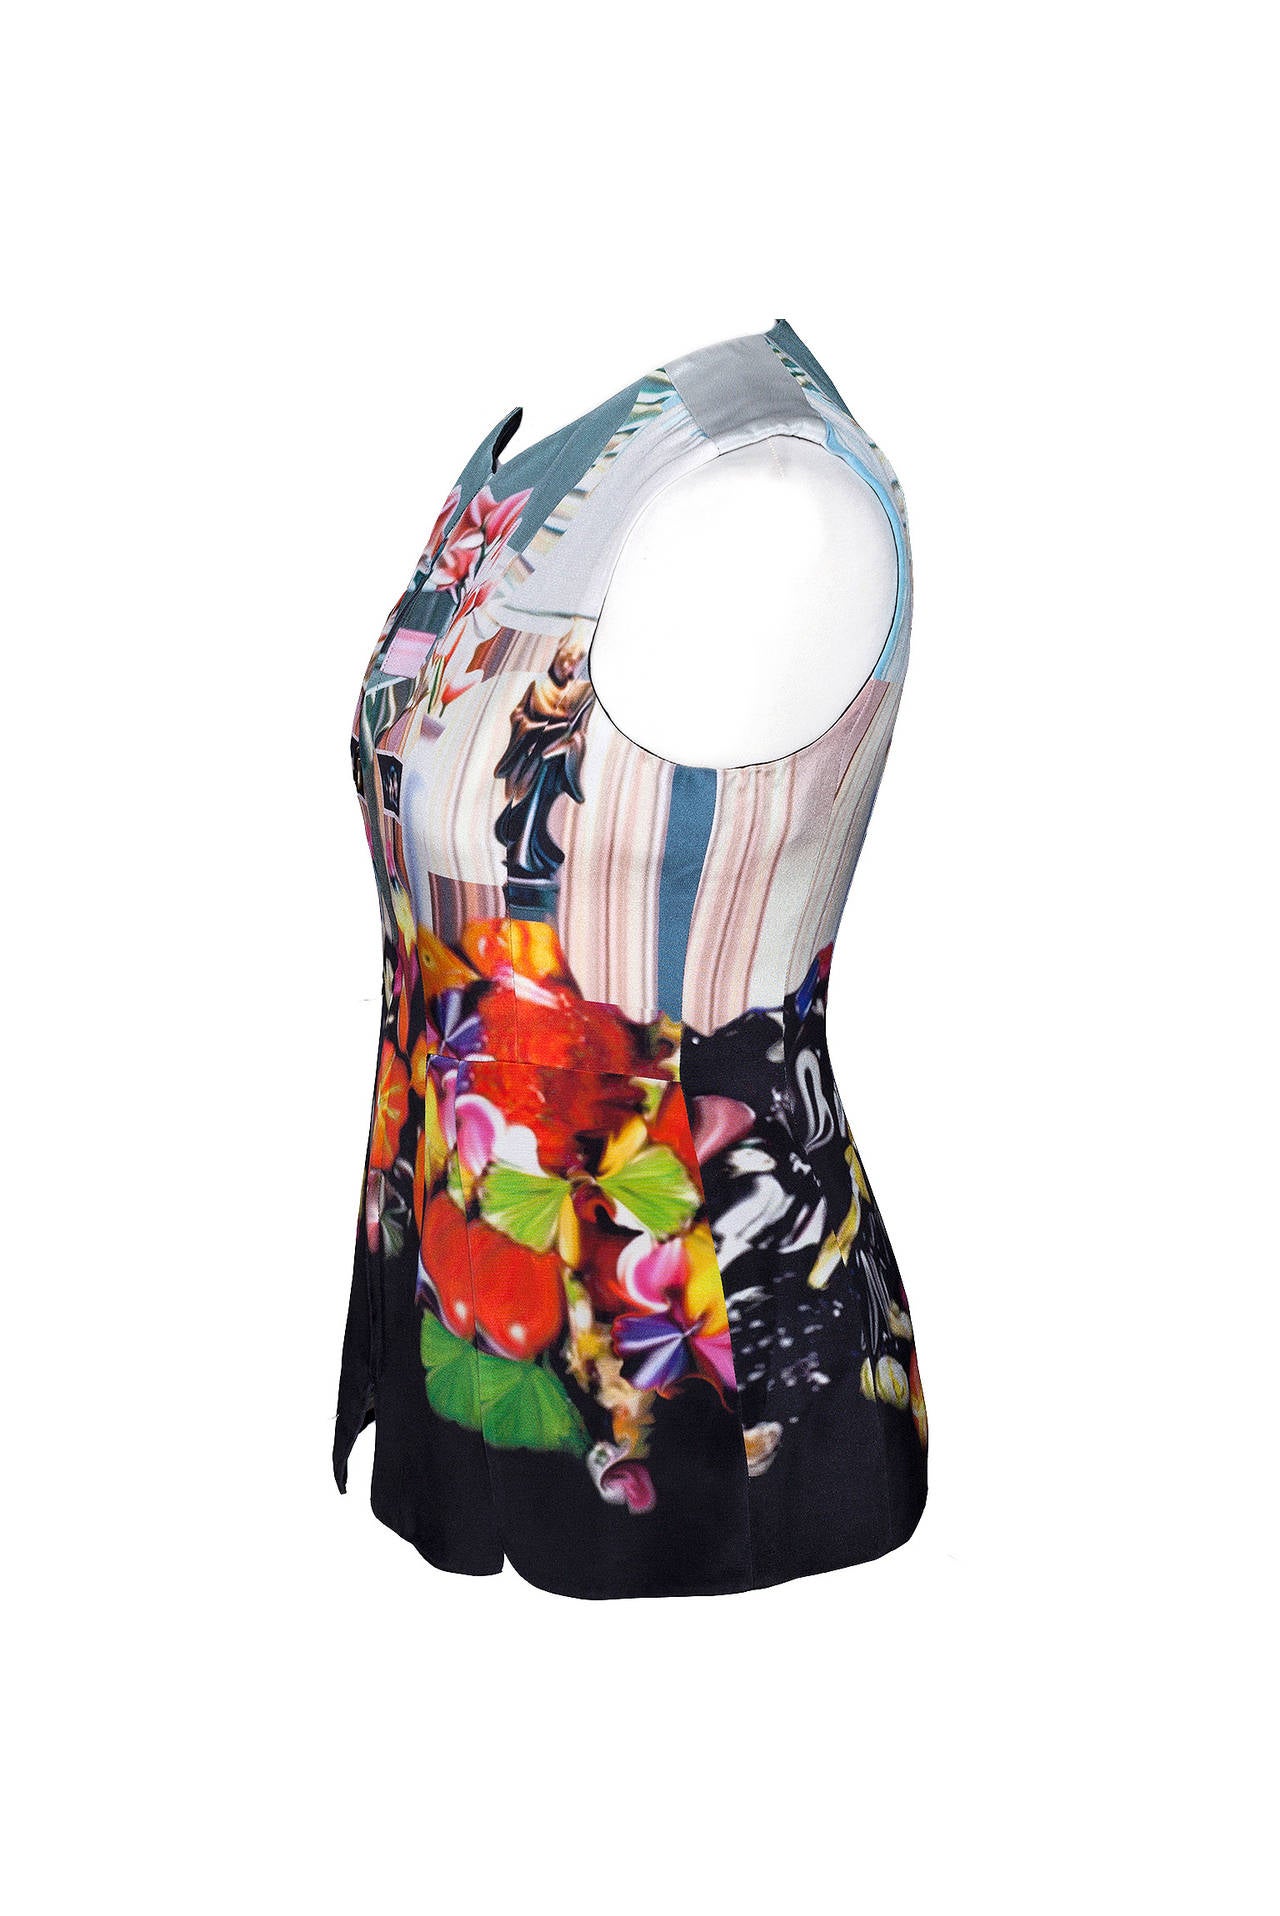 Mary Katranzou photo print sleeveless top in silk, soon to be iconic Mary Katranzous's photo print work is now recognizable in the world of fashion.